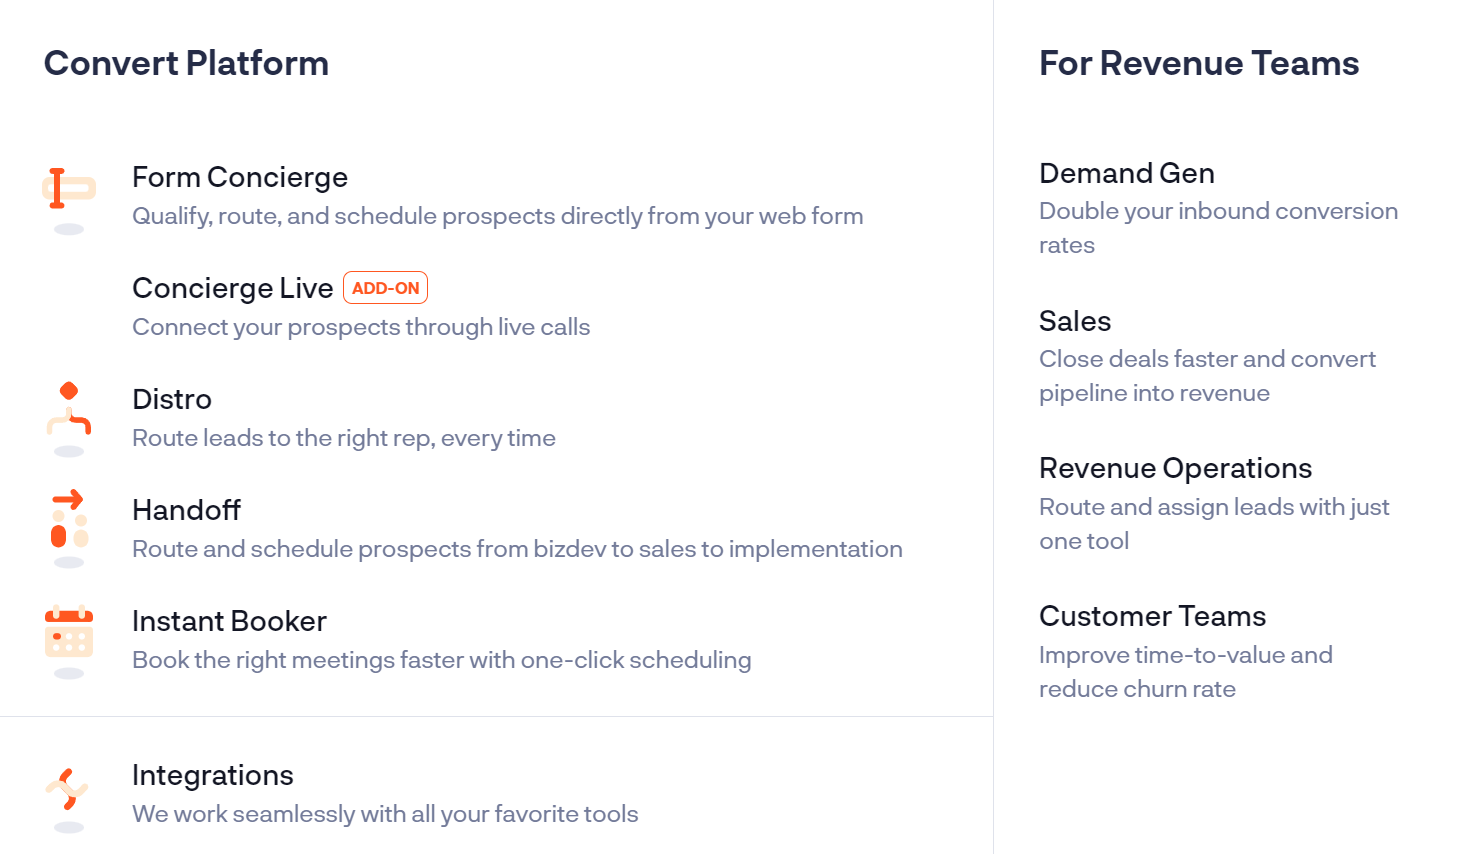 Chili Piper's product menu explains how it targets each section of its B2B revenue team audience.